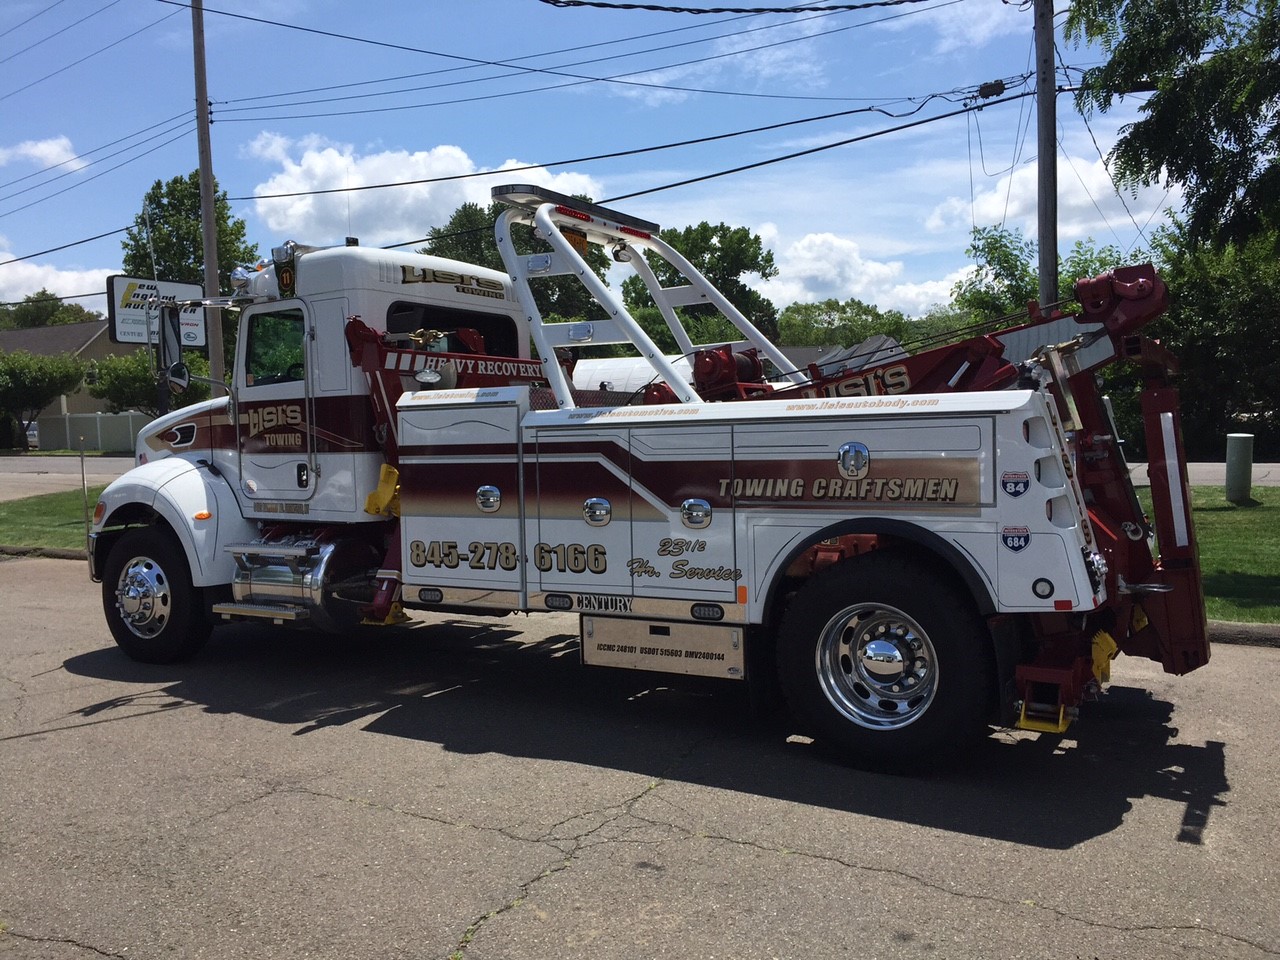 Lisi's Towing, Brewster, NY / Century 3212